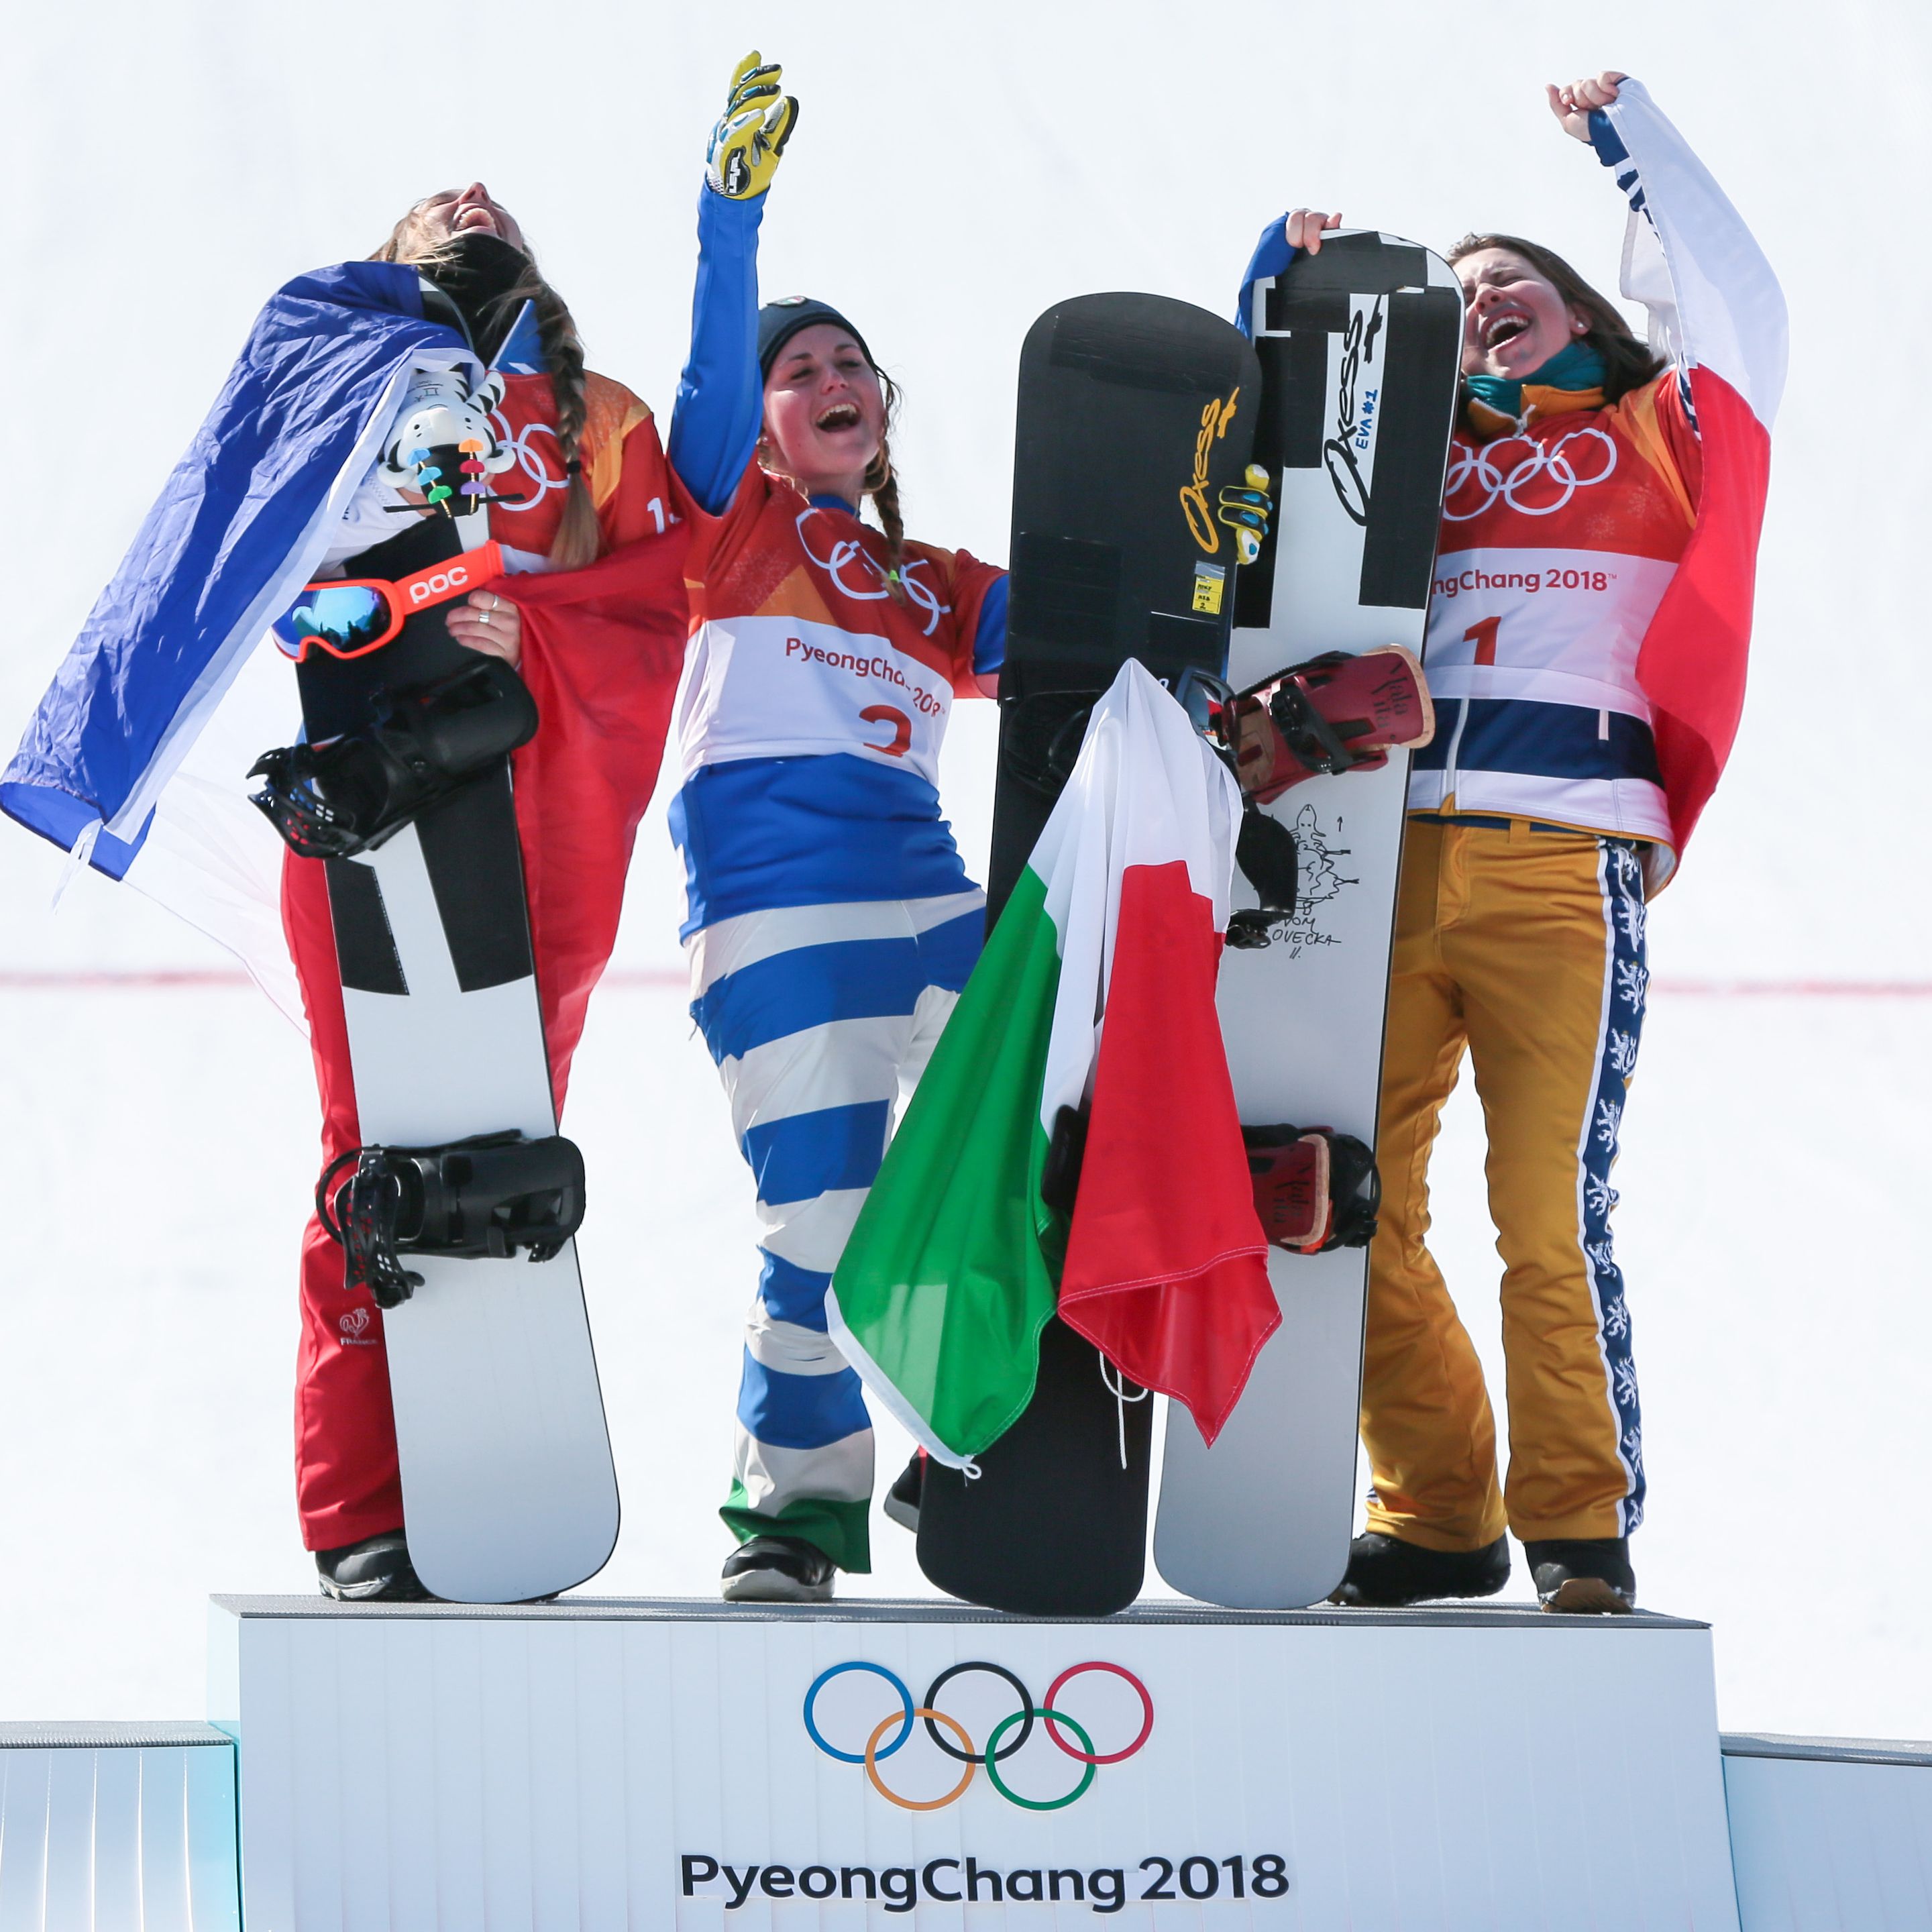 PYEONGCHANG-GUN, SOUTH KOREA - FEBRUARY 16: Michela Moioli of Italy takes 1st place, Julia Pereira De Sousa Mabileau of France takes 2nd place, Eva Samkova of Czech Republic takes 3rd place during the Snowboarding Women's Snowboard Cross Finals at Pheonix Snow Park on February 16, 2018 in Pyeongchang-gun, South Korea. (Photo by Laurent Salino/Agence Zoom)